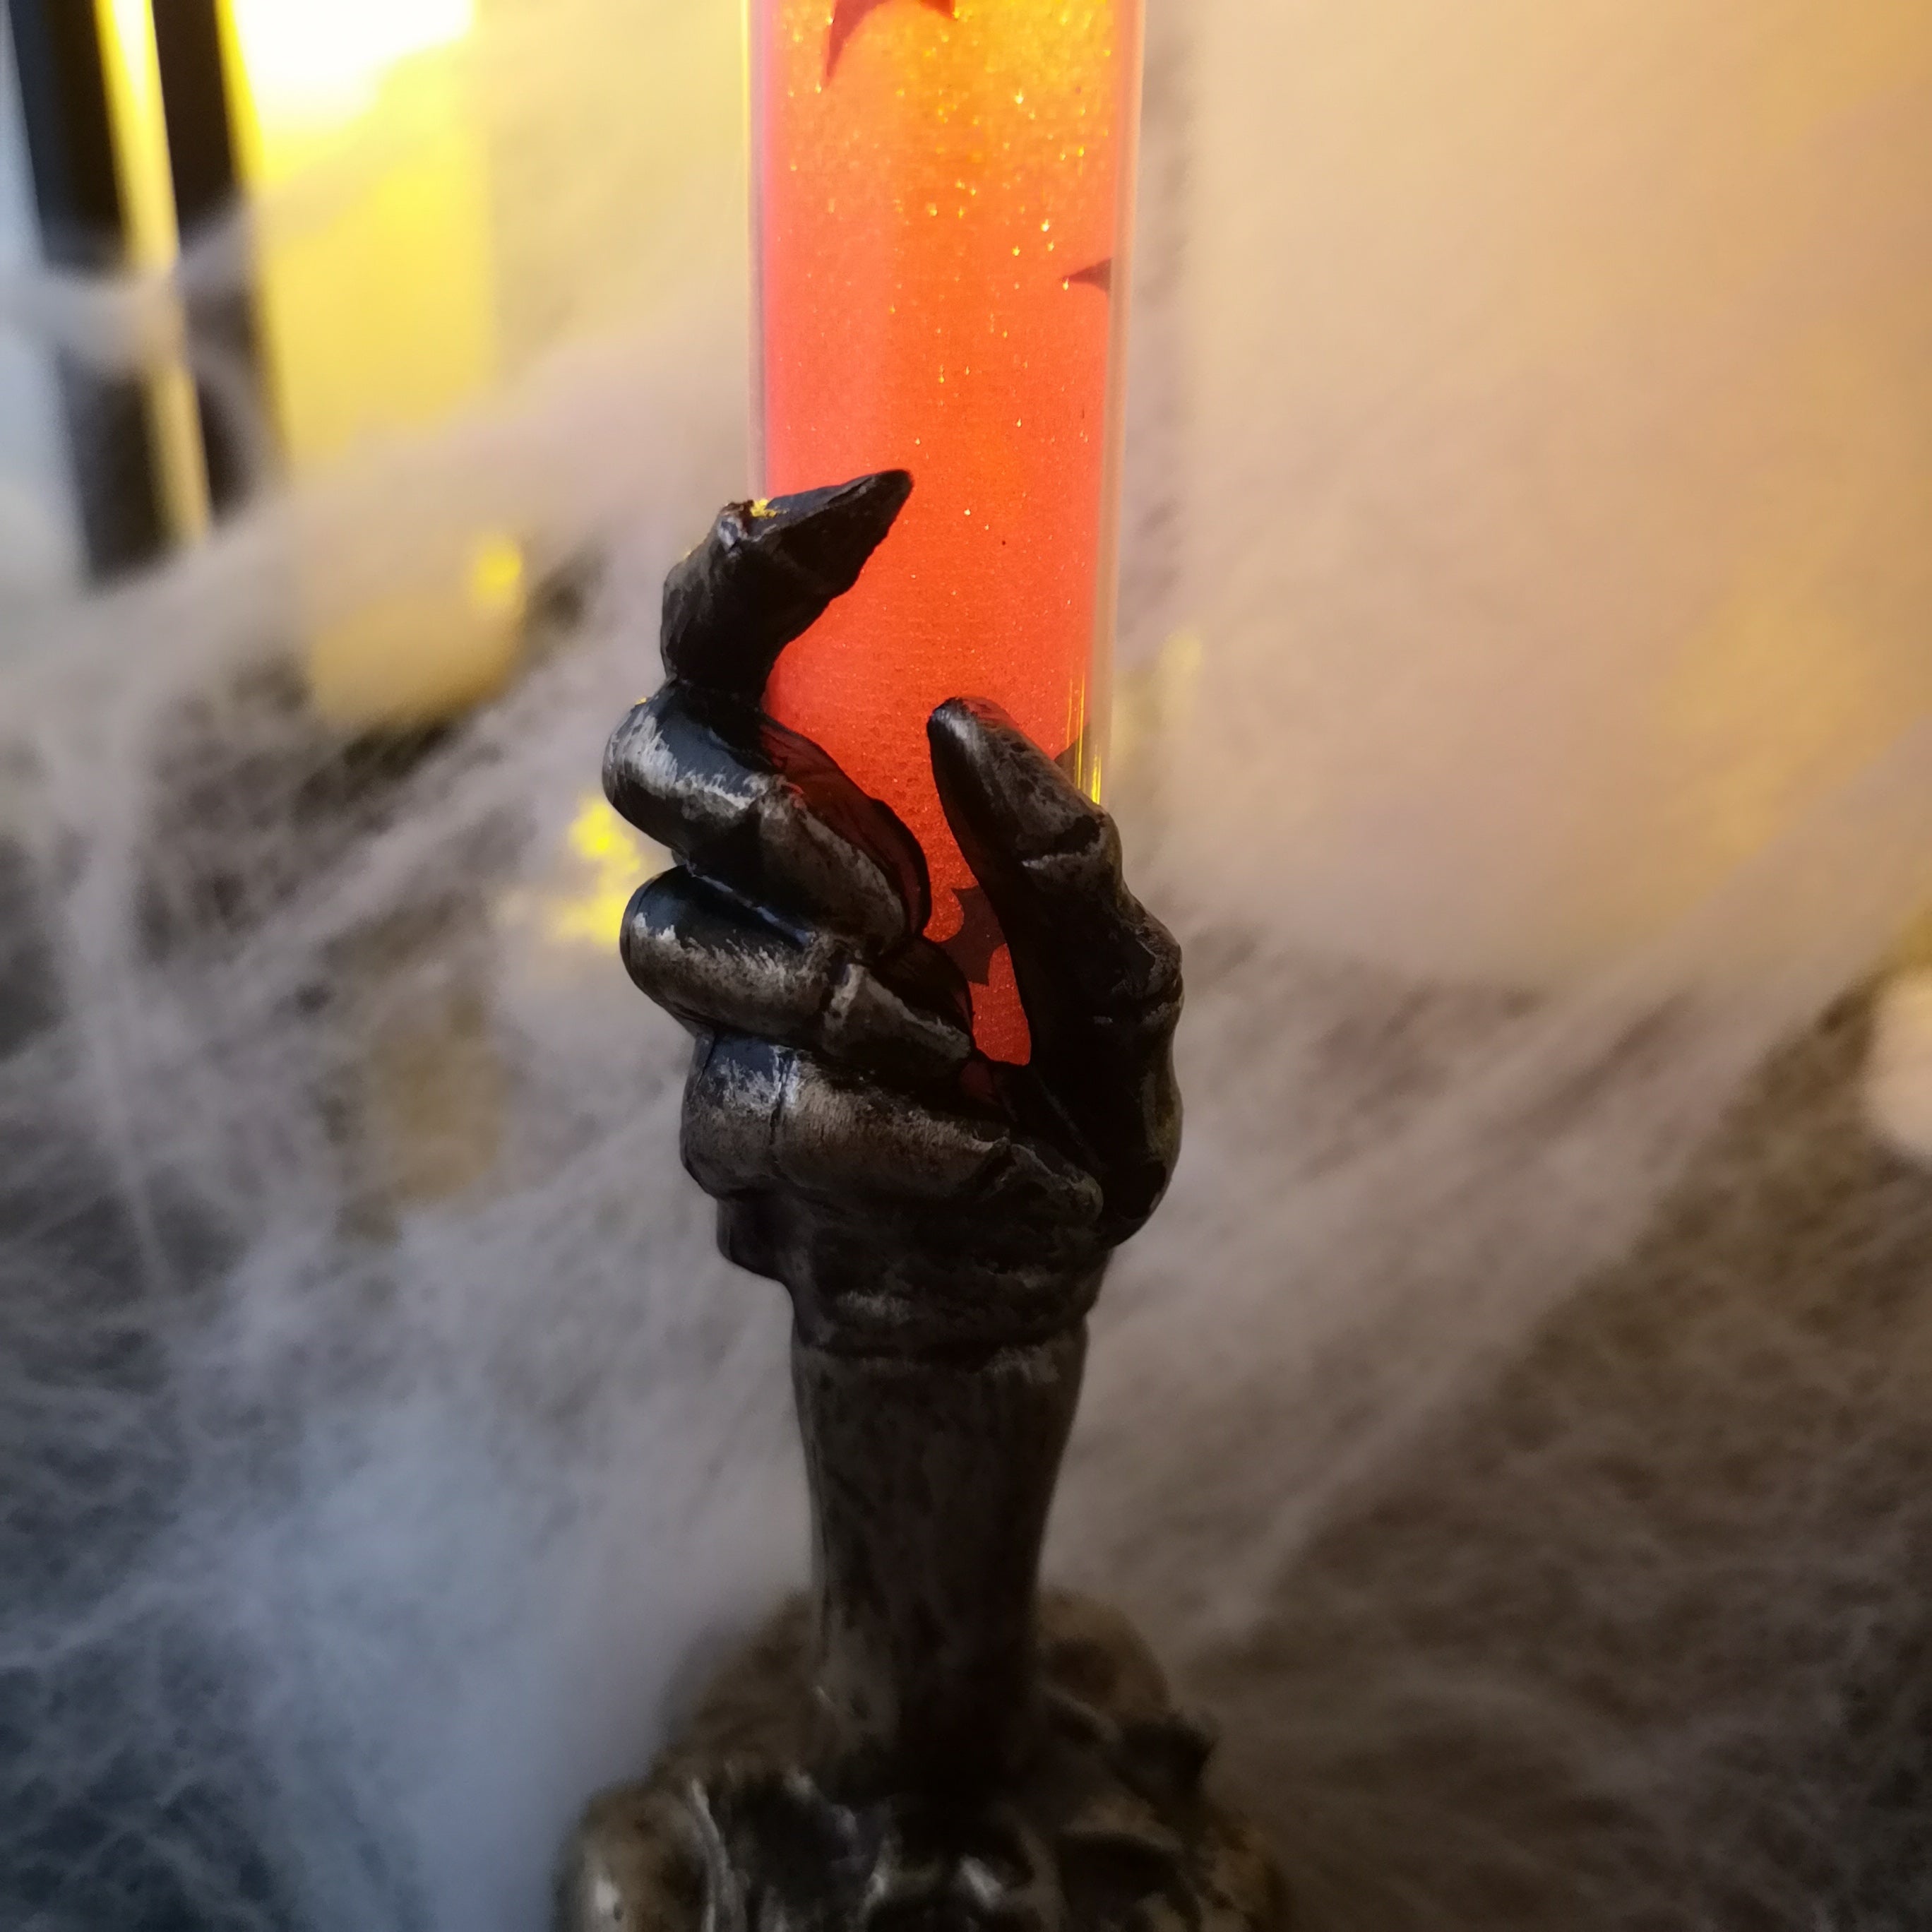 LED Halloween Skull Hand Flickering Candle Decoration in Bronze